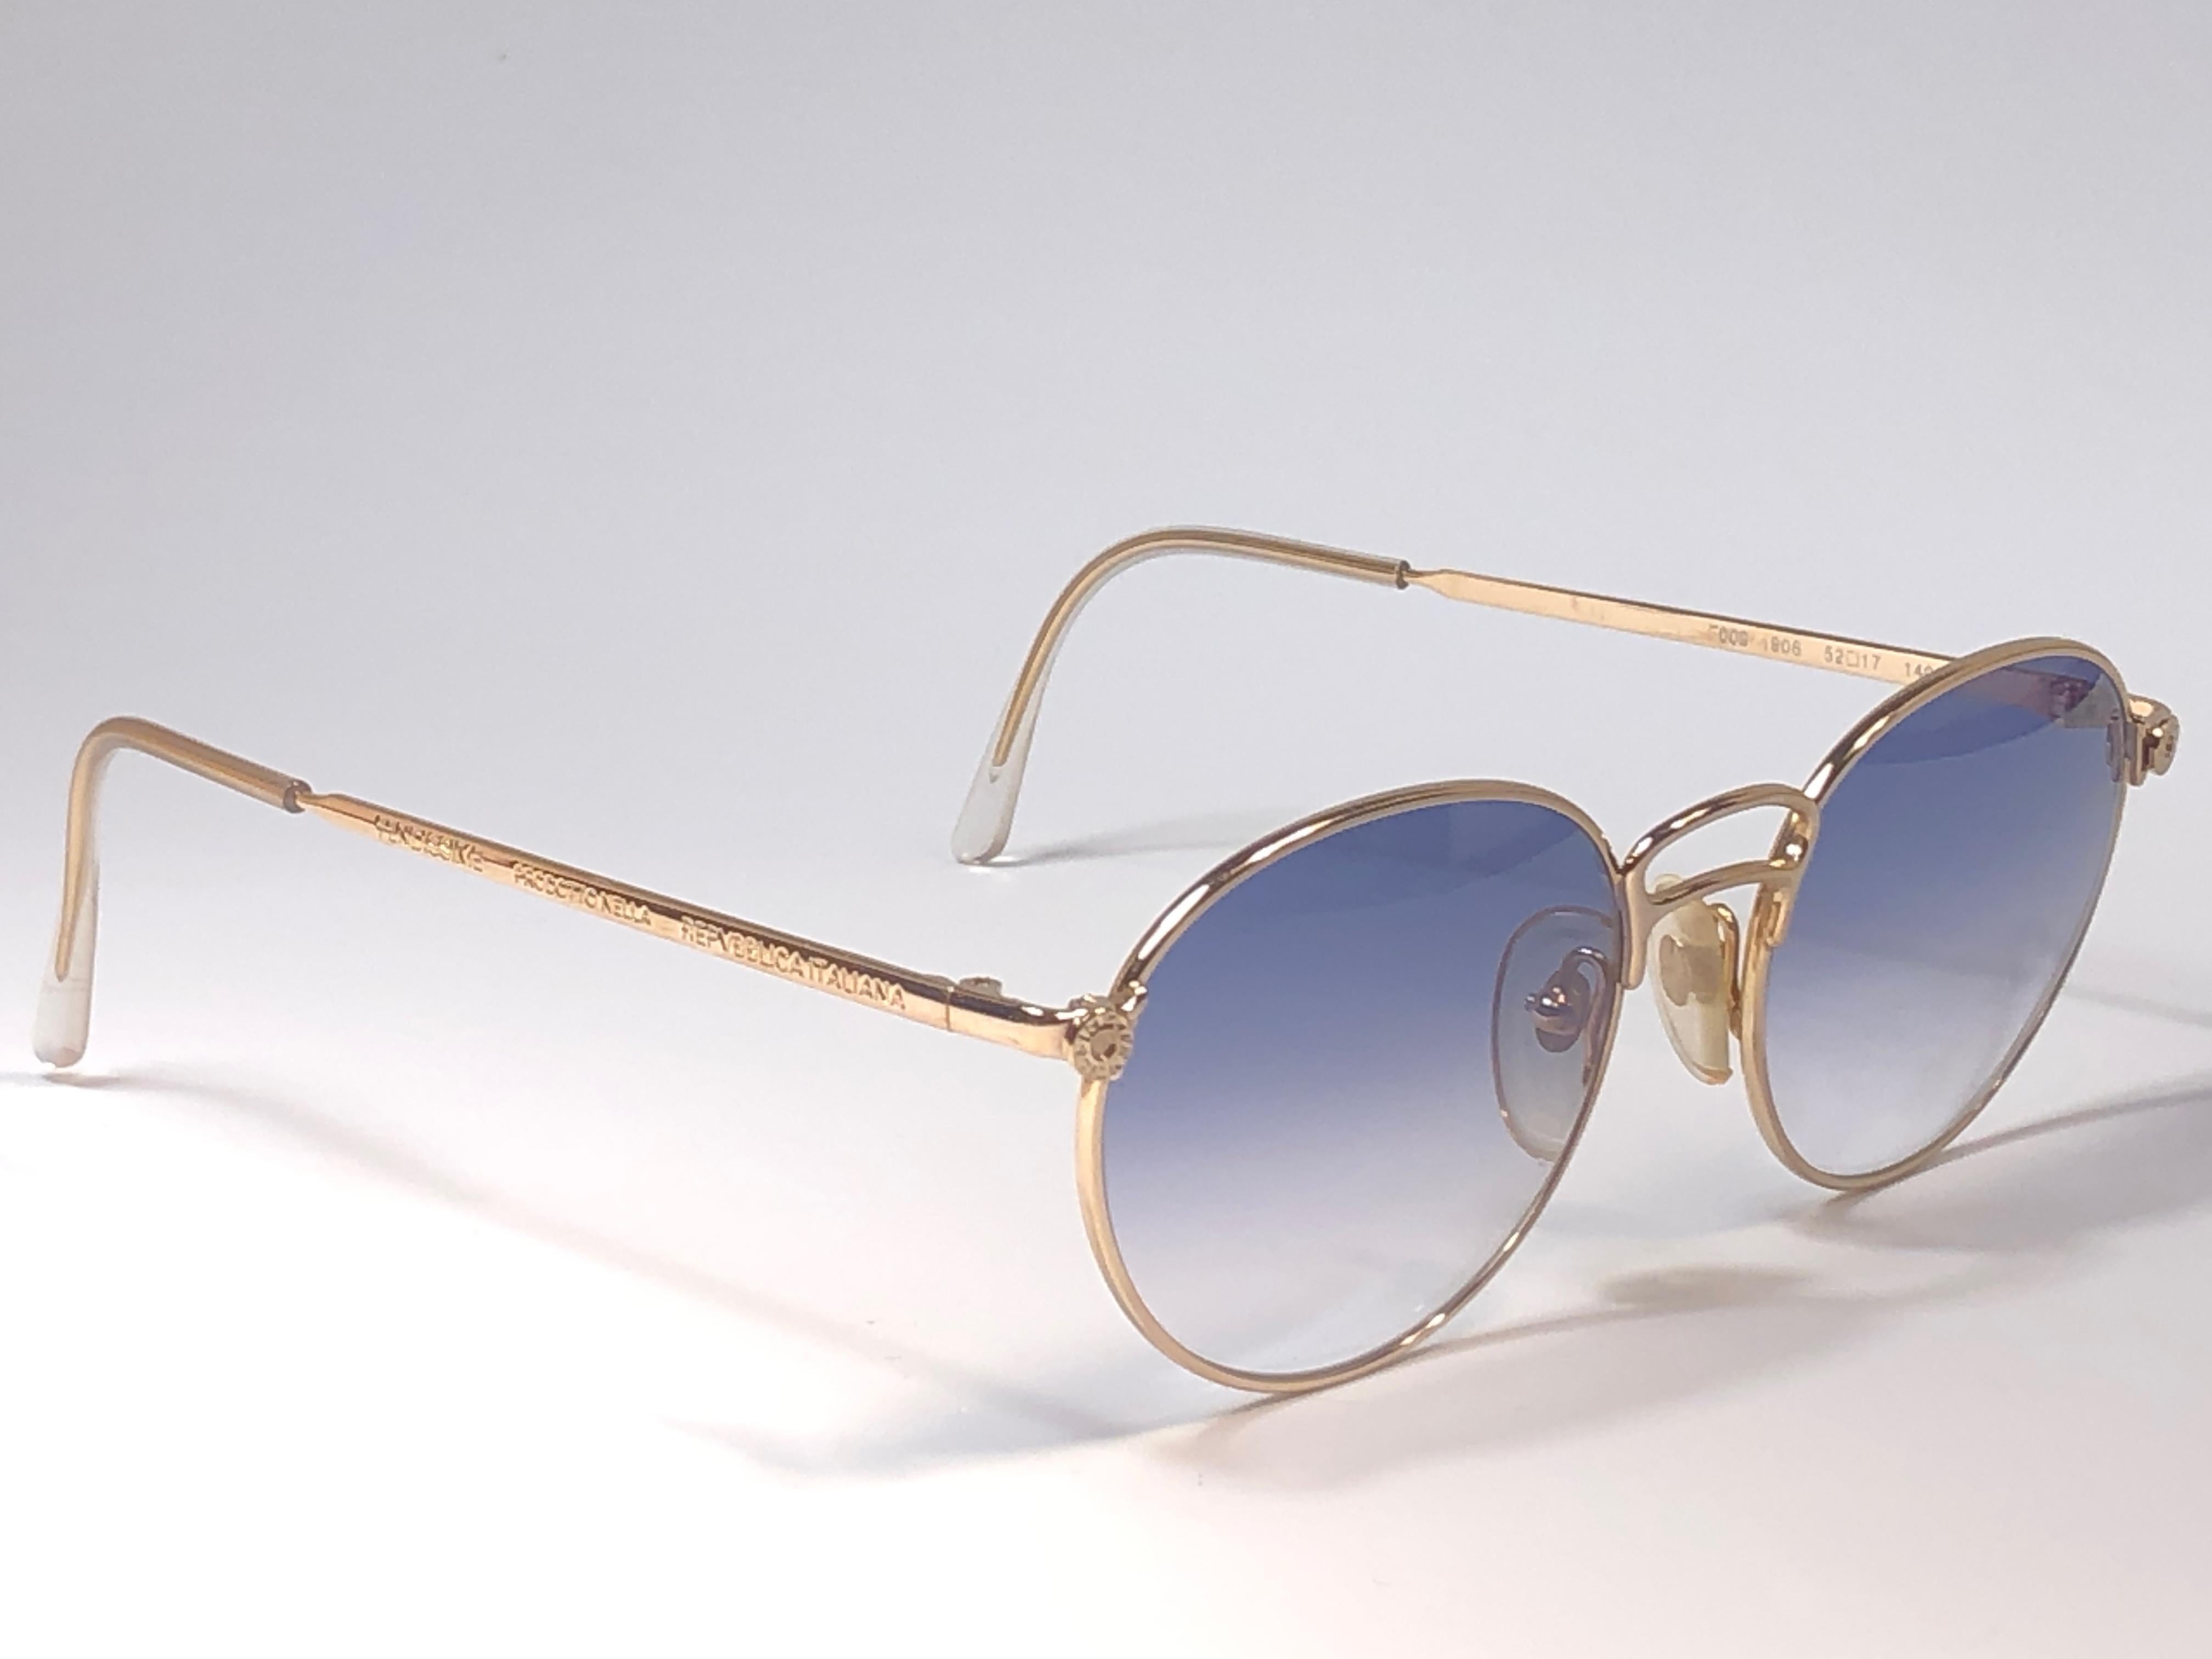 New Fendissime gold frame. 
Spotless light blue lenses.

Amazing design with strong yet intricate details.
Design and produced in the 1990's.
New, never worn or displayed.
A true fashion statement.
